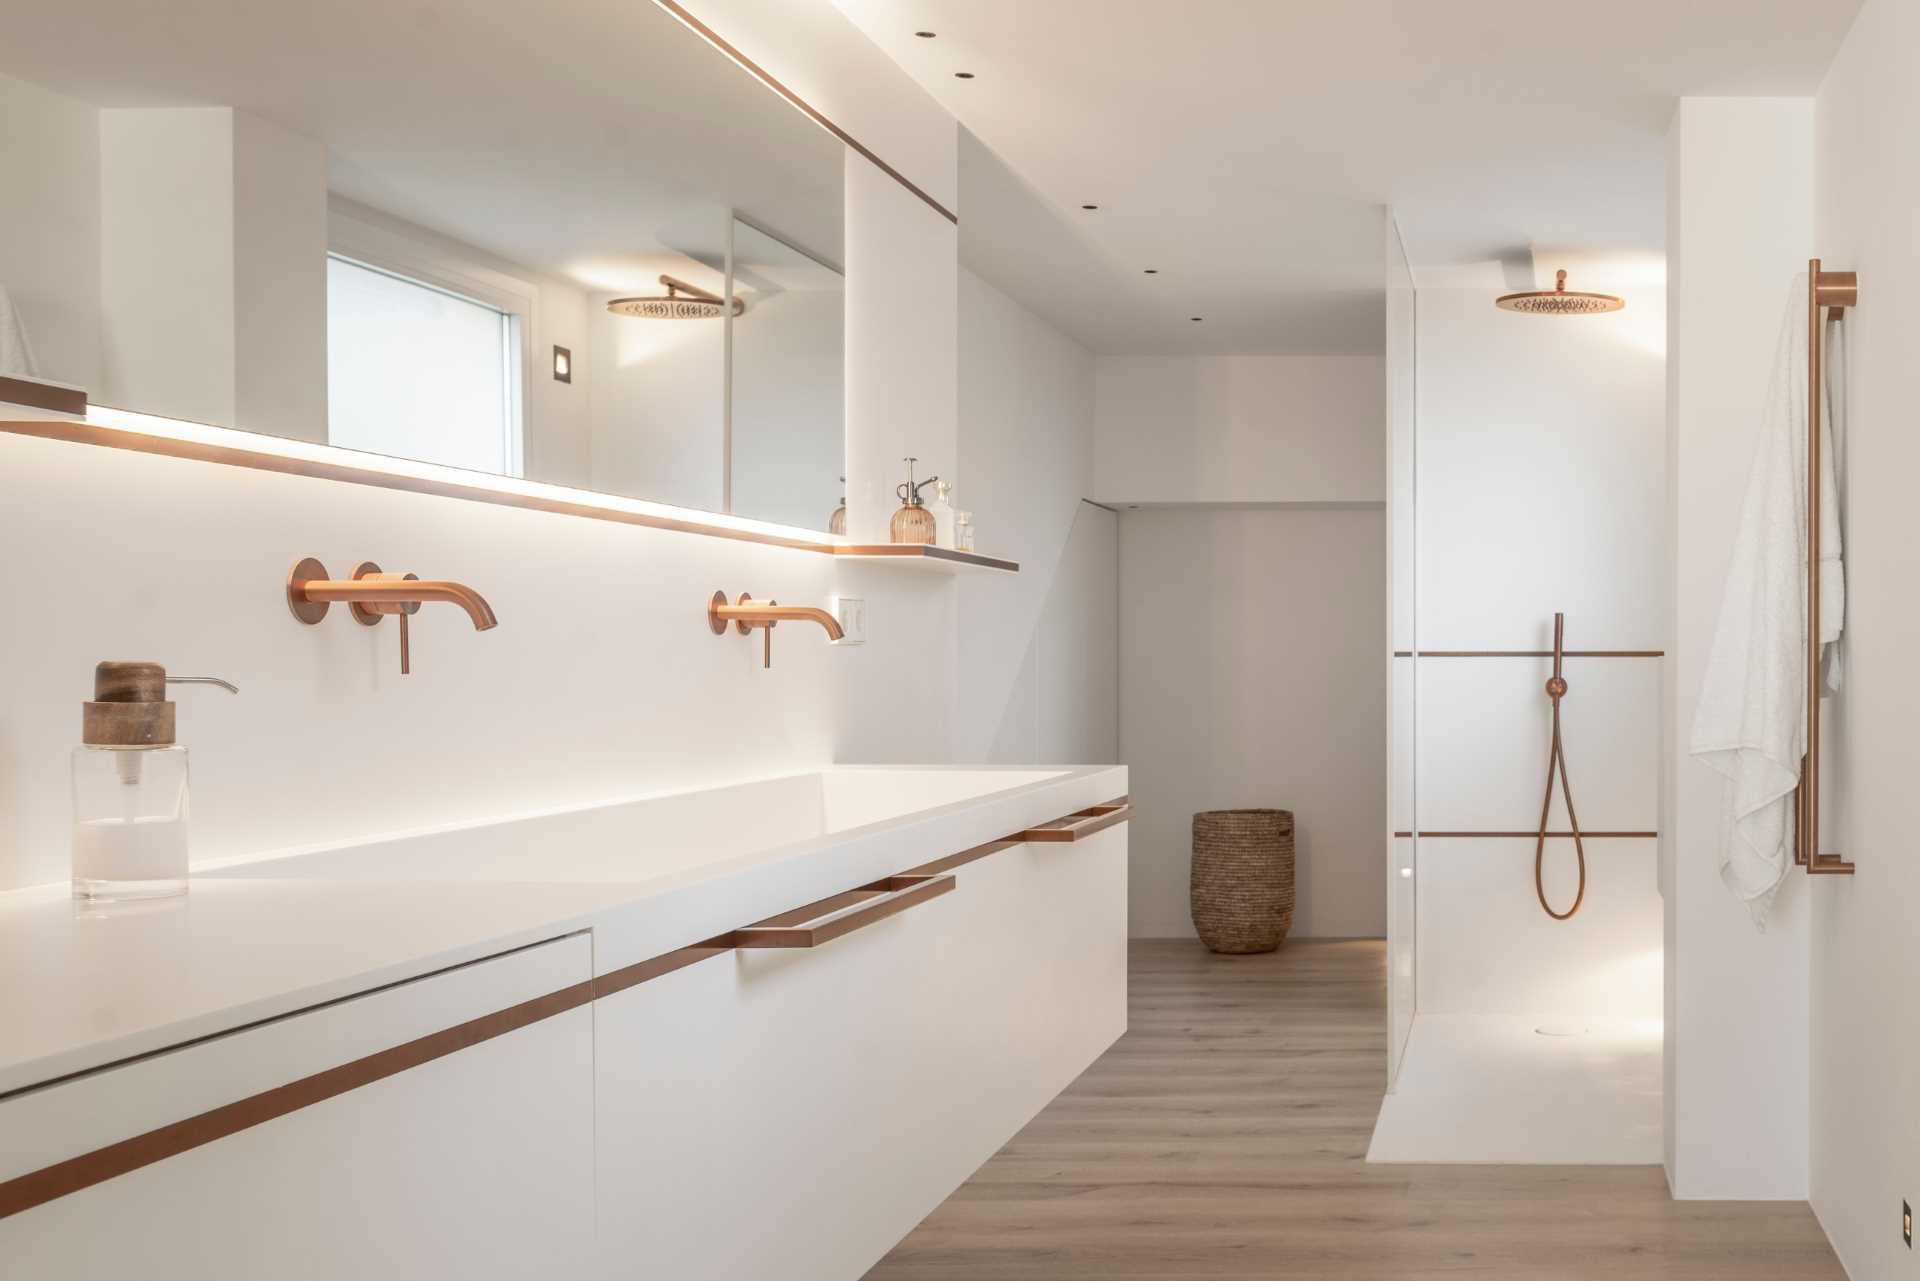 White, the designer’s hallmark, was chosen as the main hue for this spacious bathroom as it balances the copper accents throughout, like in the hardware, shelving, and faucets.